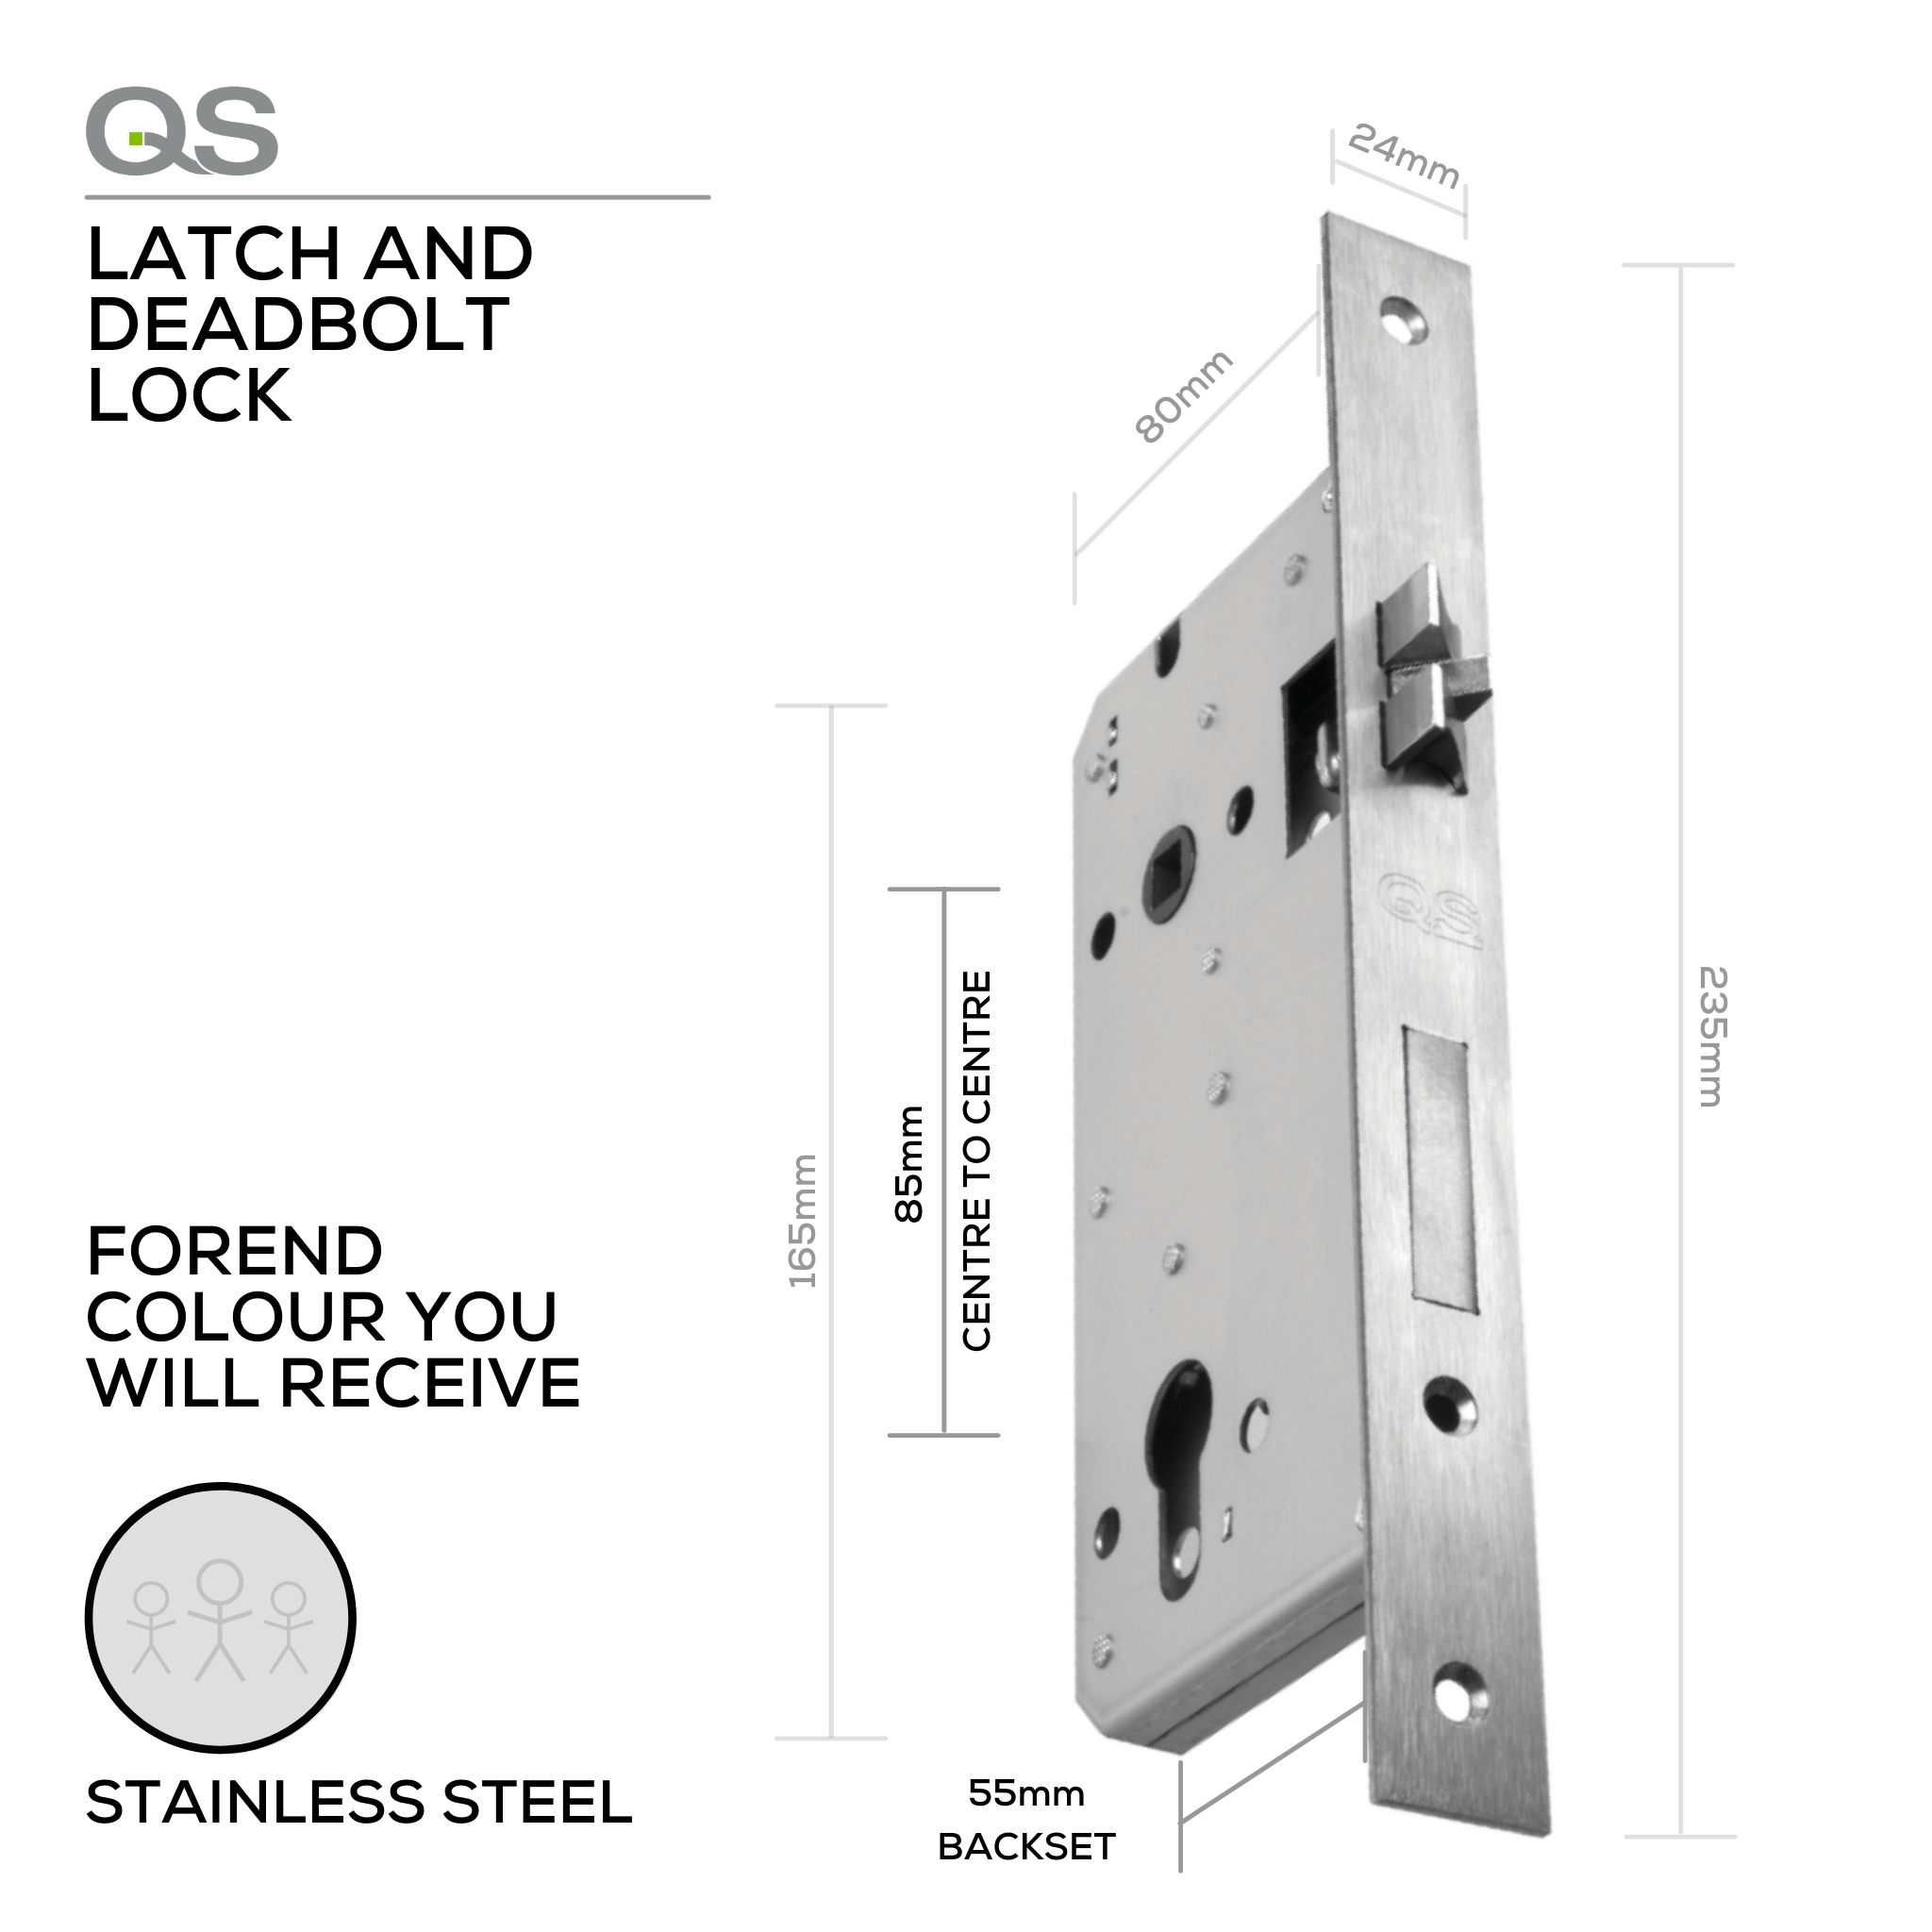 QS8555/SS, Latch & Deadbolt Lock, Euro Cylinder, Excluding Cylinder, 55mm (Backset), 85mm (ctc), Stainless Steel, QS